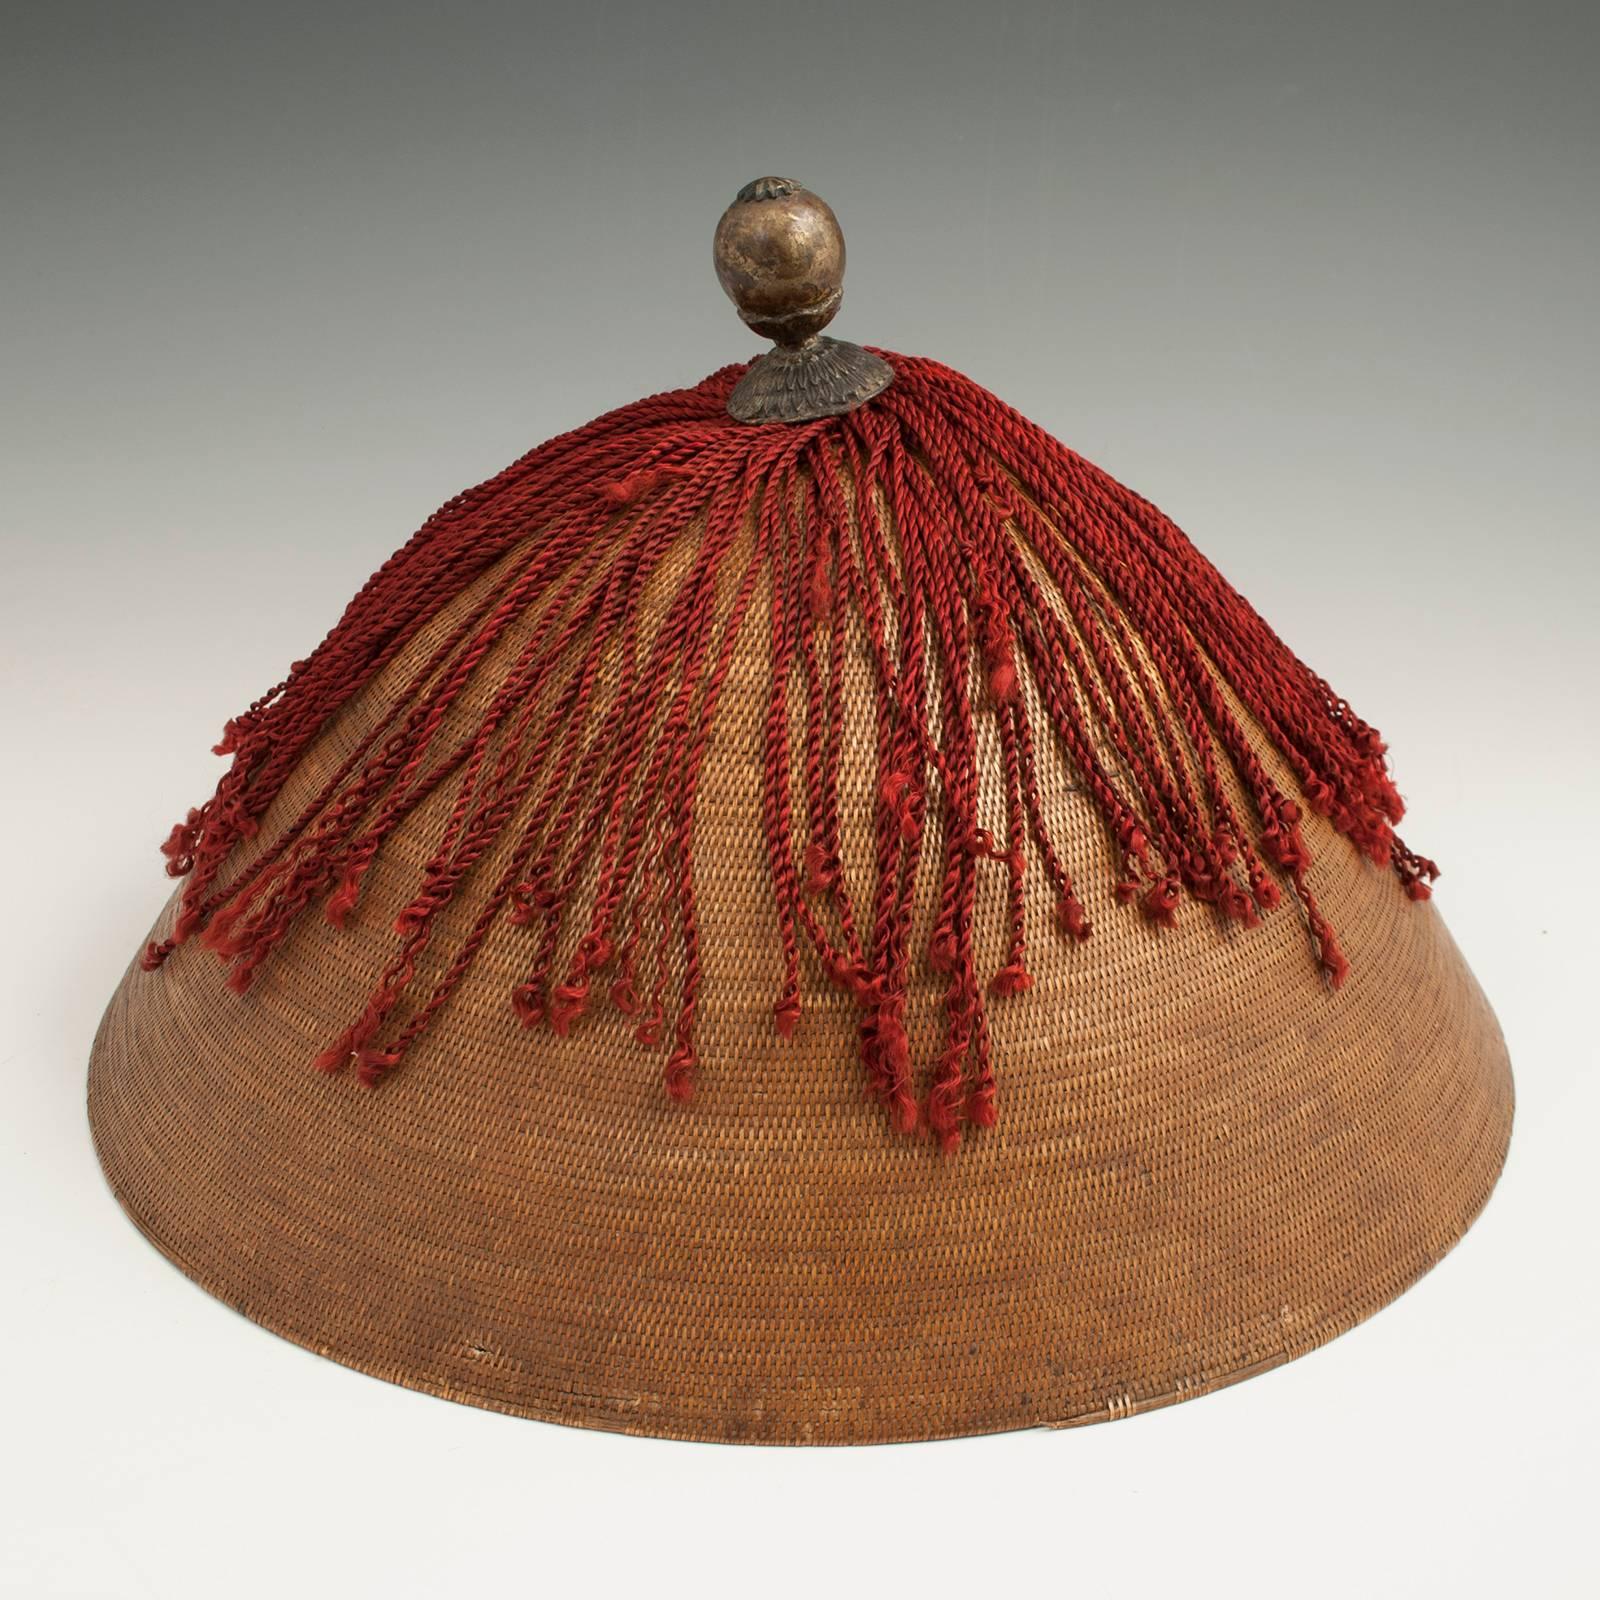 Offered by Zena Kruzick
19th century Qing dynasty man's wicker summer hat and leather hat box, China

A man's summer hat made of woven wicker with the original silk fringe and metal finial. It fits neatly in the accompanying red lacquered leather